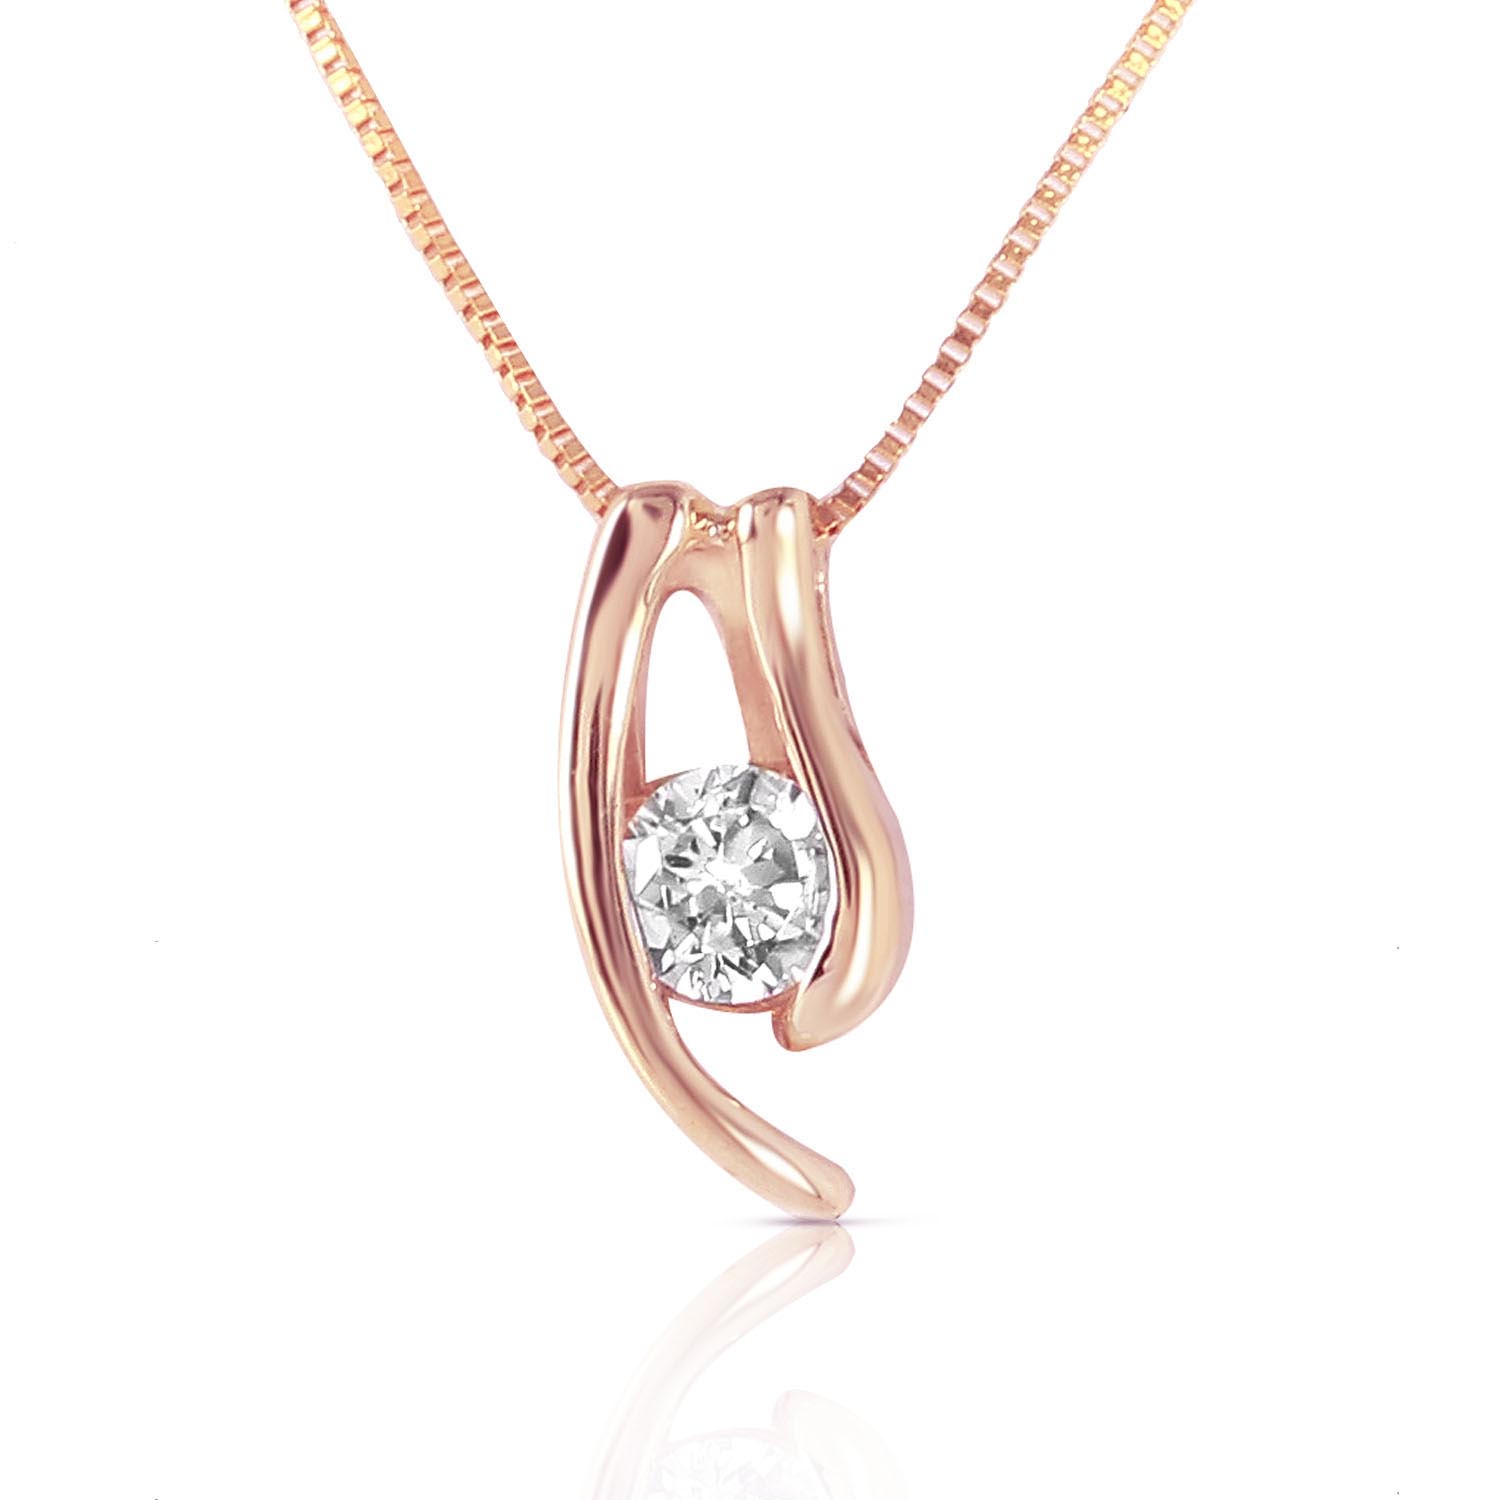 Round Cut Diamond Pendant Necklace 0.15 ct in 9ct Rose Gold